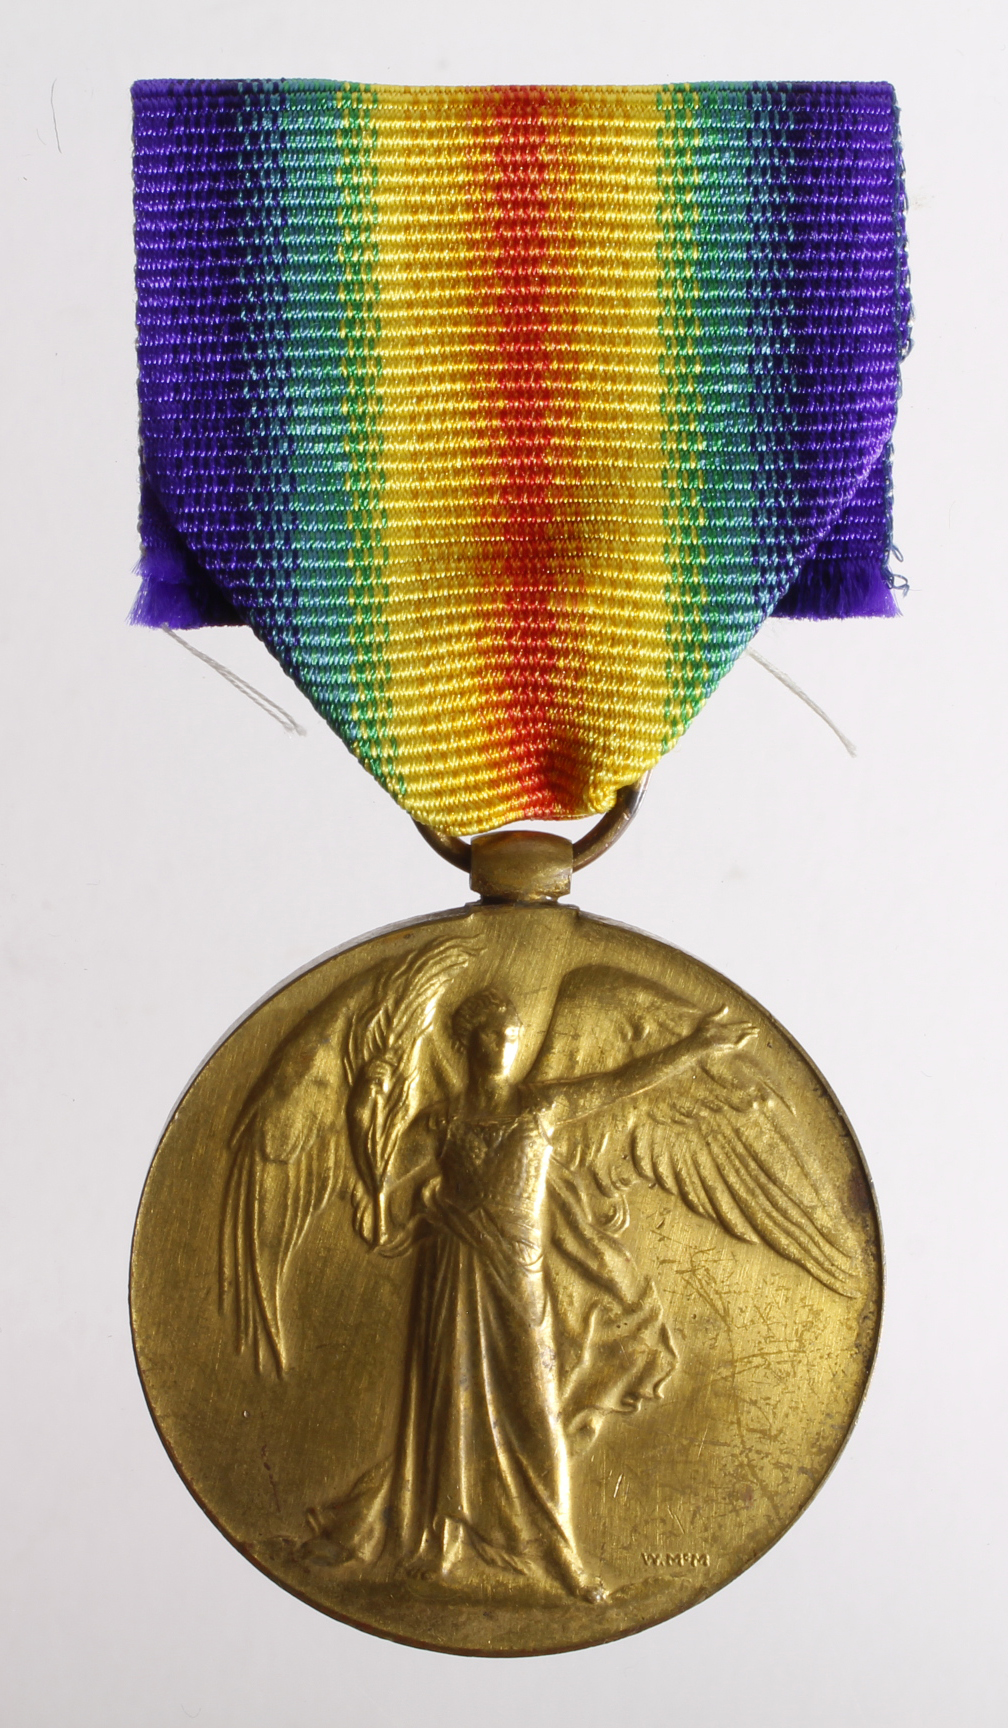 Victory Medal to 3339 Pte R Carew 19-London Regt. Killed In Action 15th Sept 1916. Lived Kentish